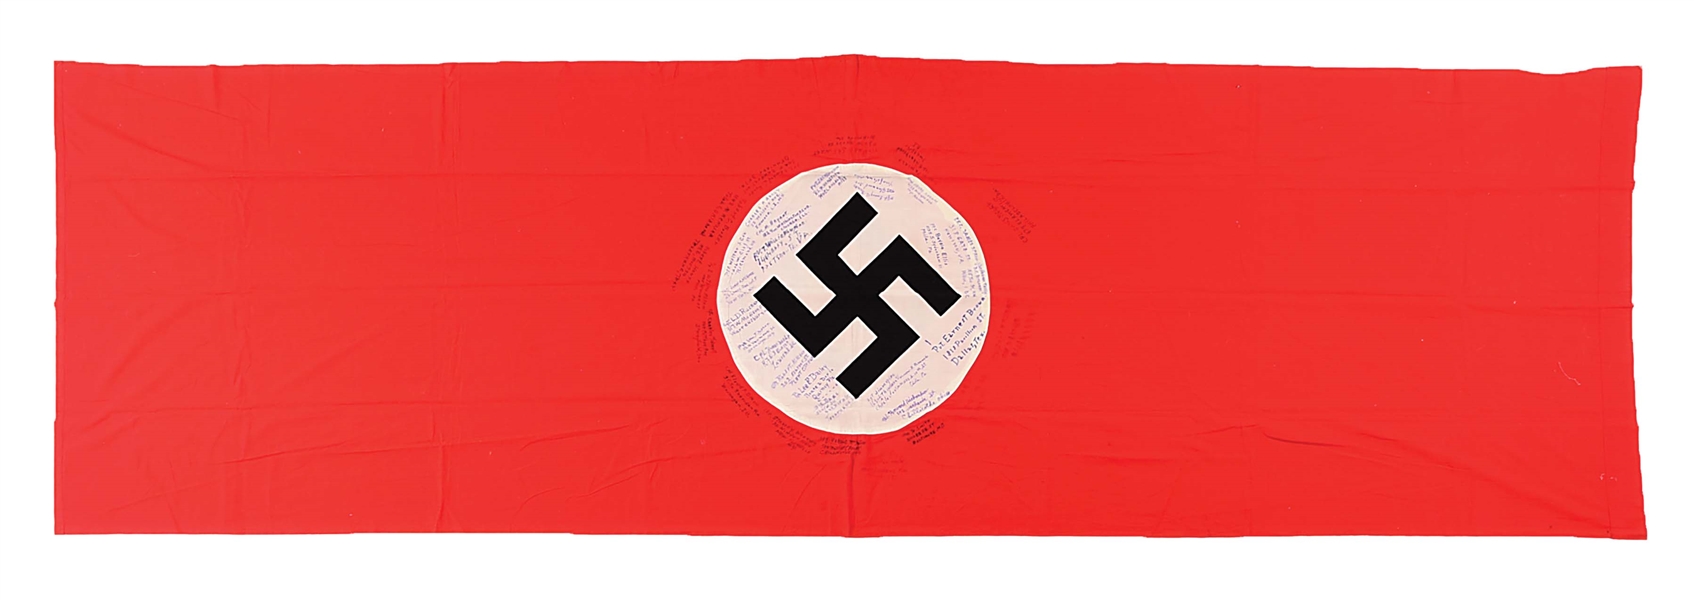 HISTORICALLY SIGNIFICANT THIRD REICH FLAG CAPTURED AND SIGNED BY MEMBERS OF THE 761ST TANK BATTALION "BLACK PANTHERS".